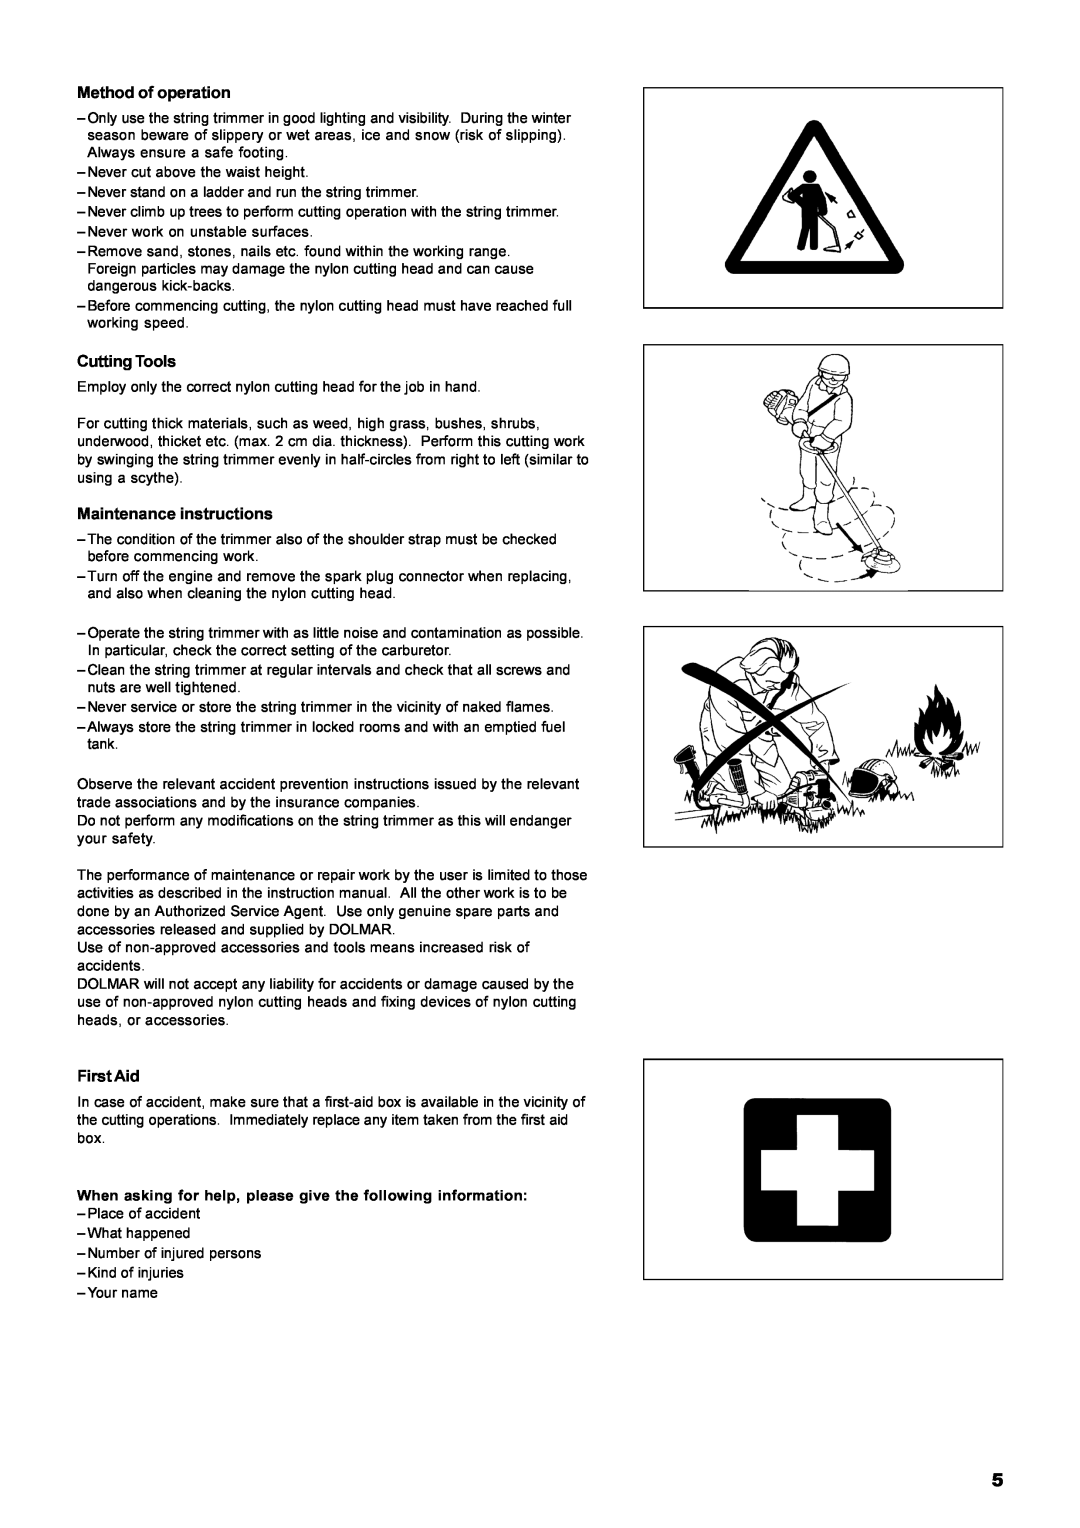 Dolmar MS-22C instruction manual Method of operation, Cutting Tools, Maintenance instructions, First Aid 